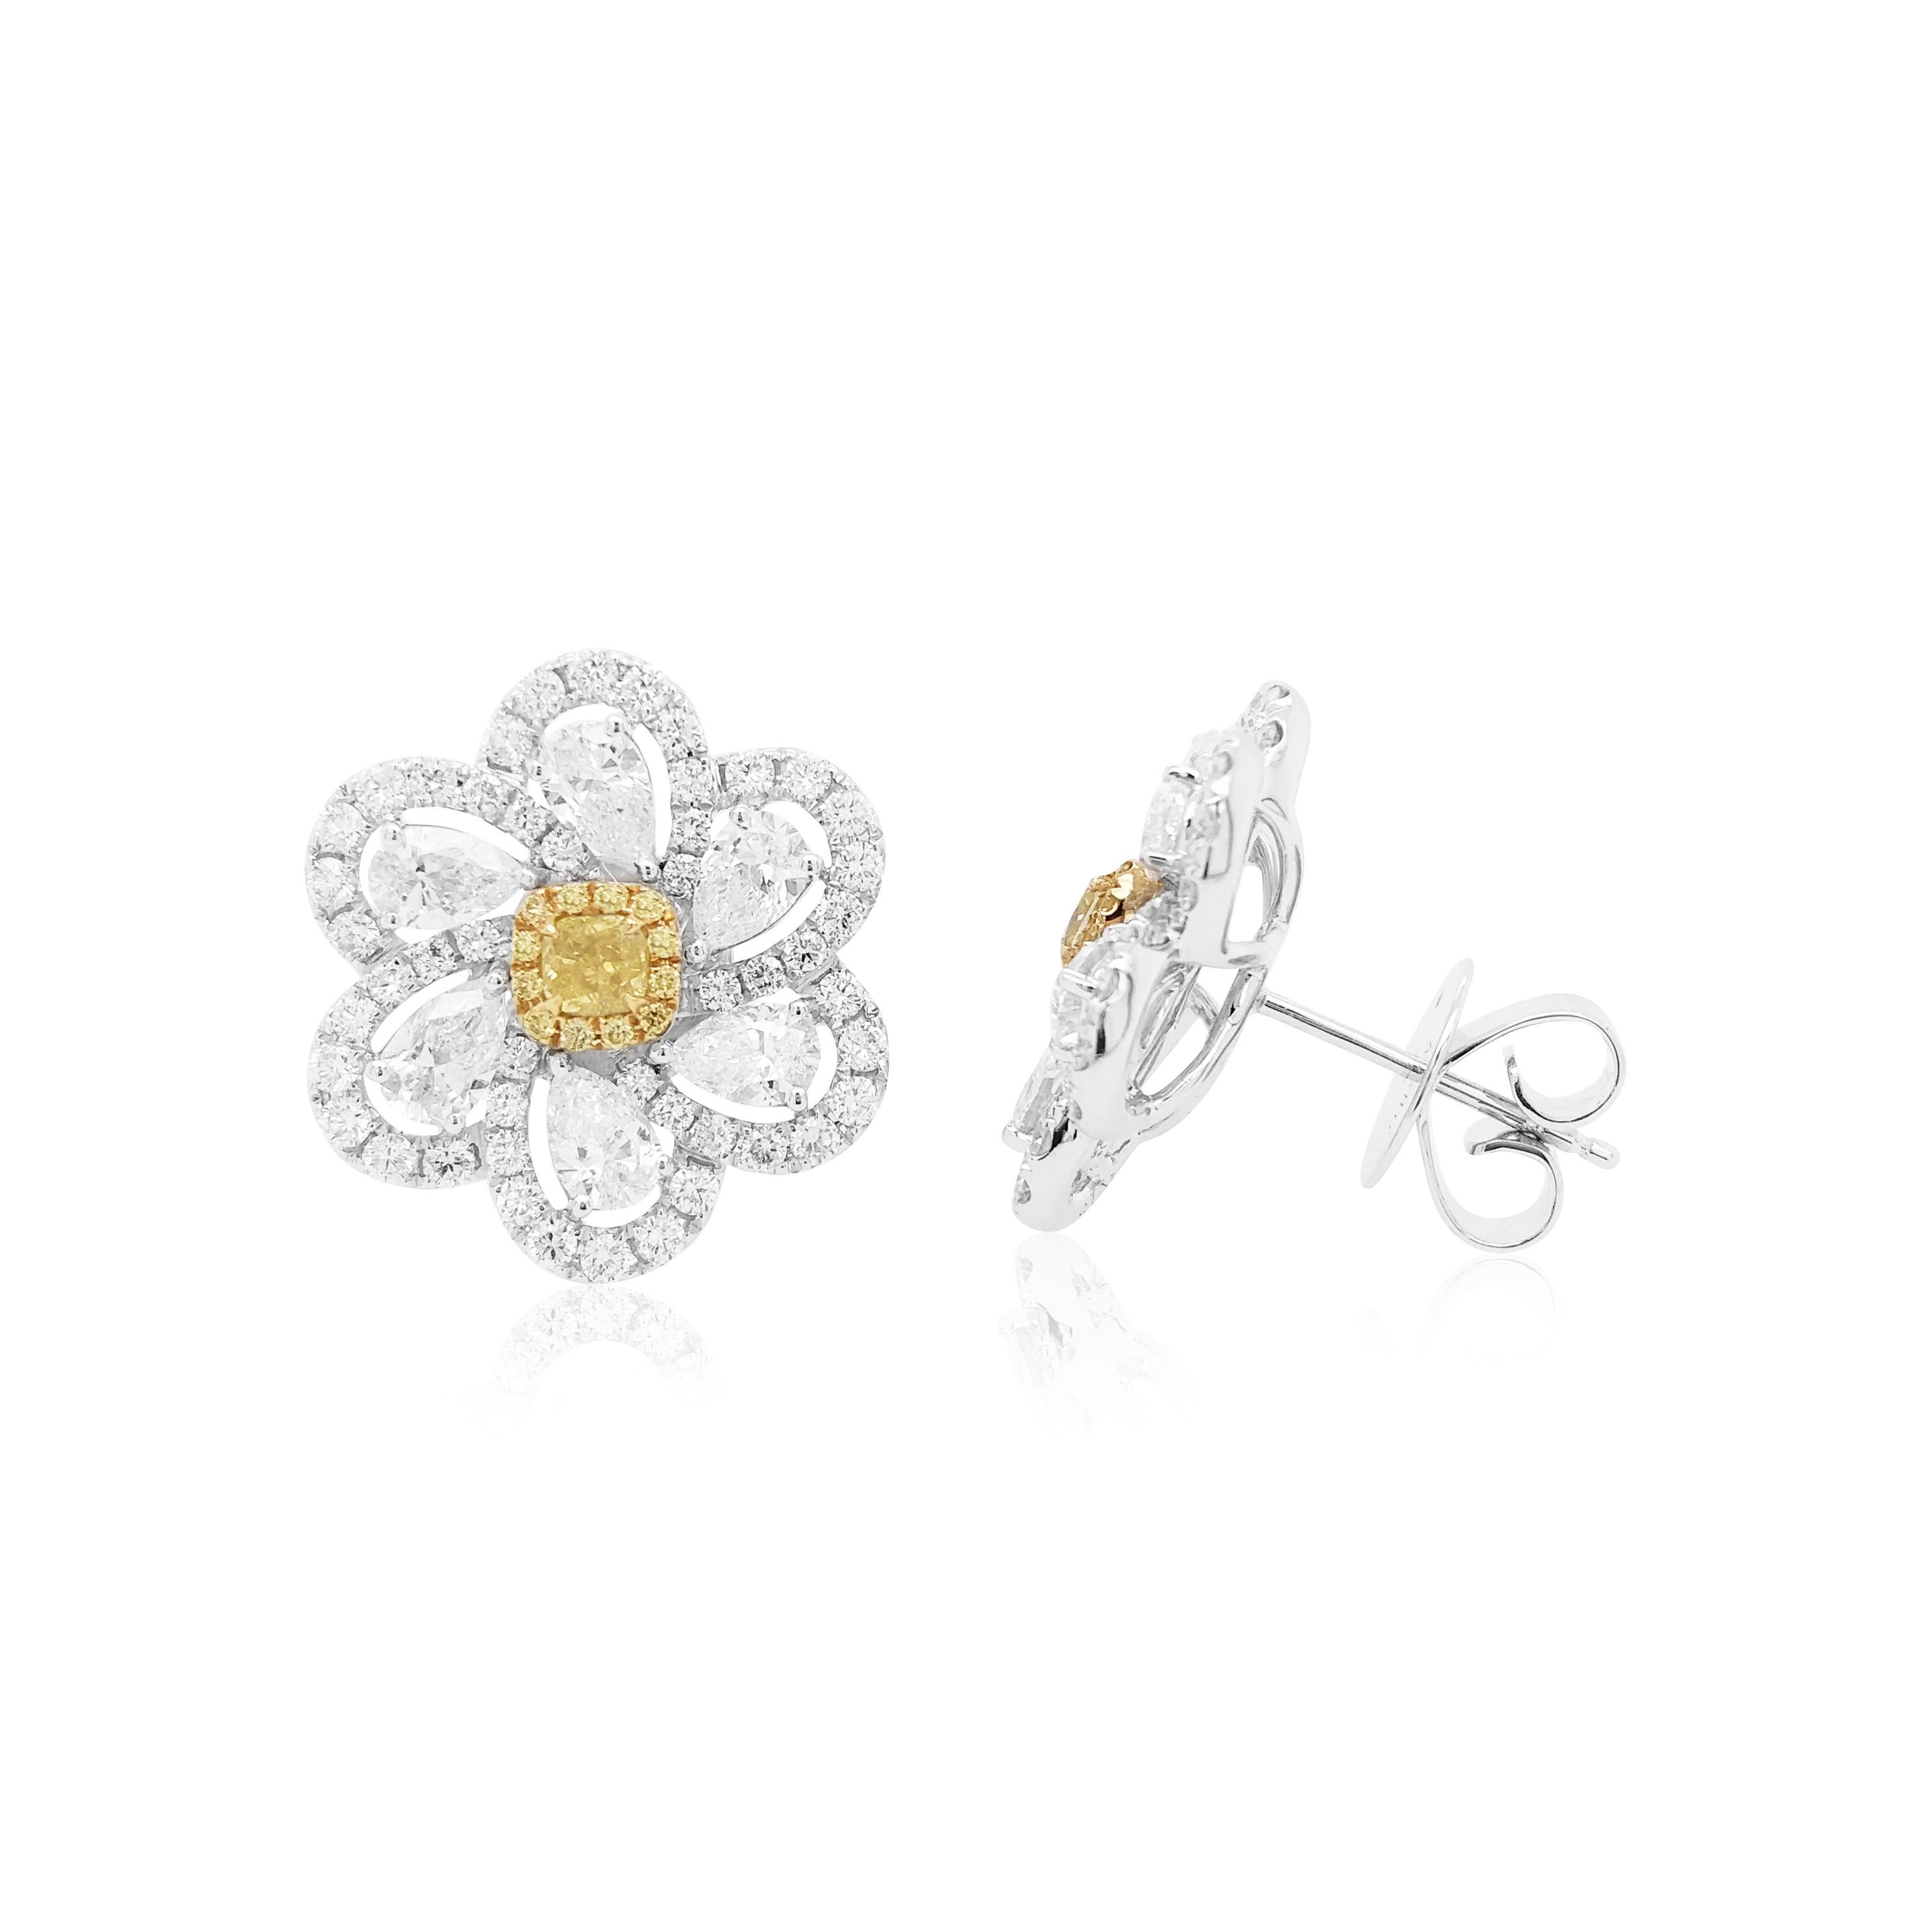 These unique flower shaped earrings feature natural Cushion-shape Yellow diamonds at the heart of their design. The rich colour of these diamonds is complimented perfectly by the delicate 18 Karat white gold floral design which completed by a